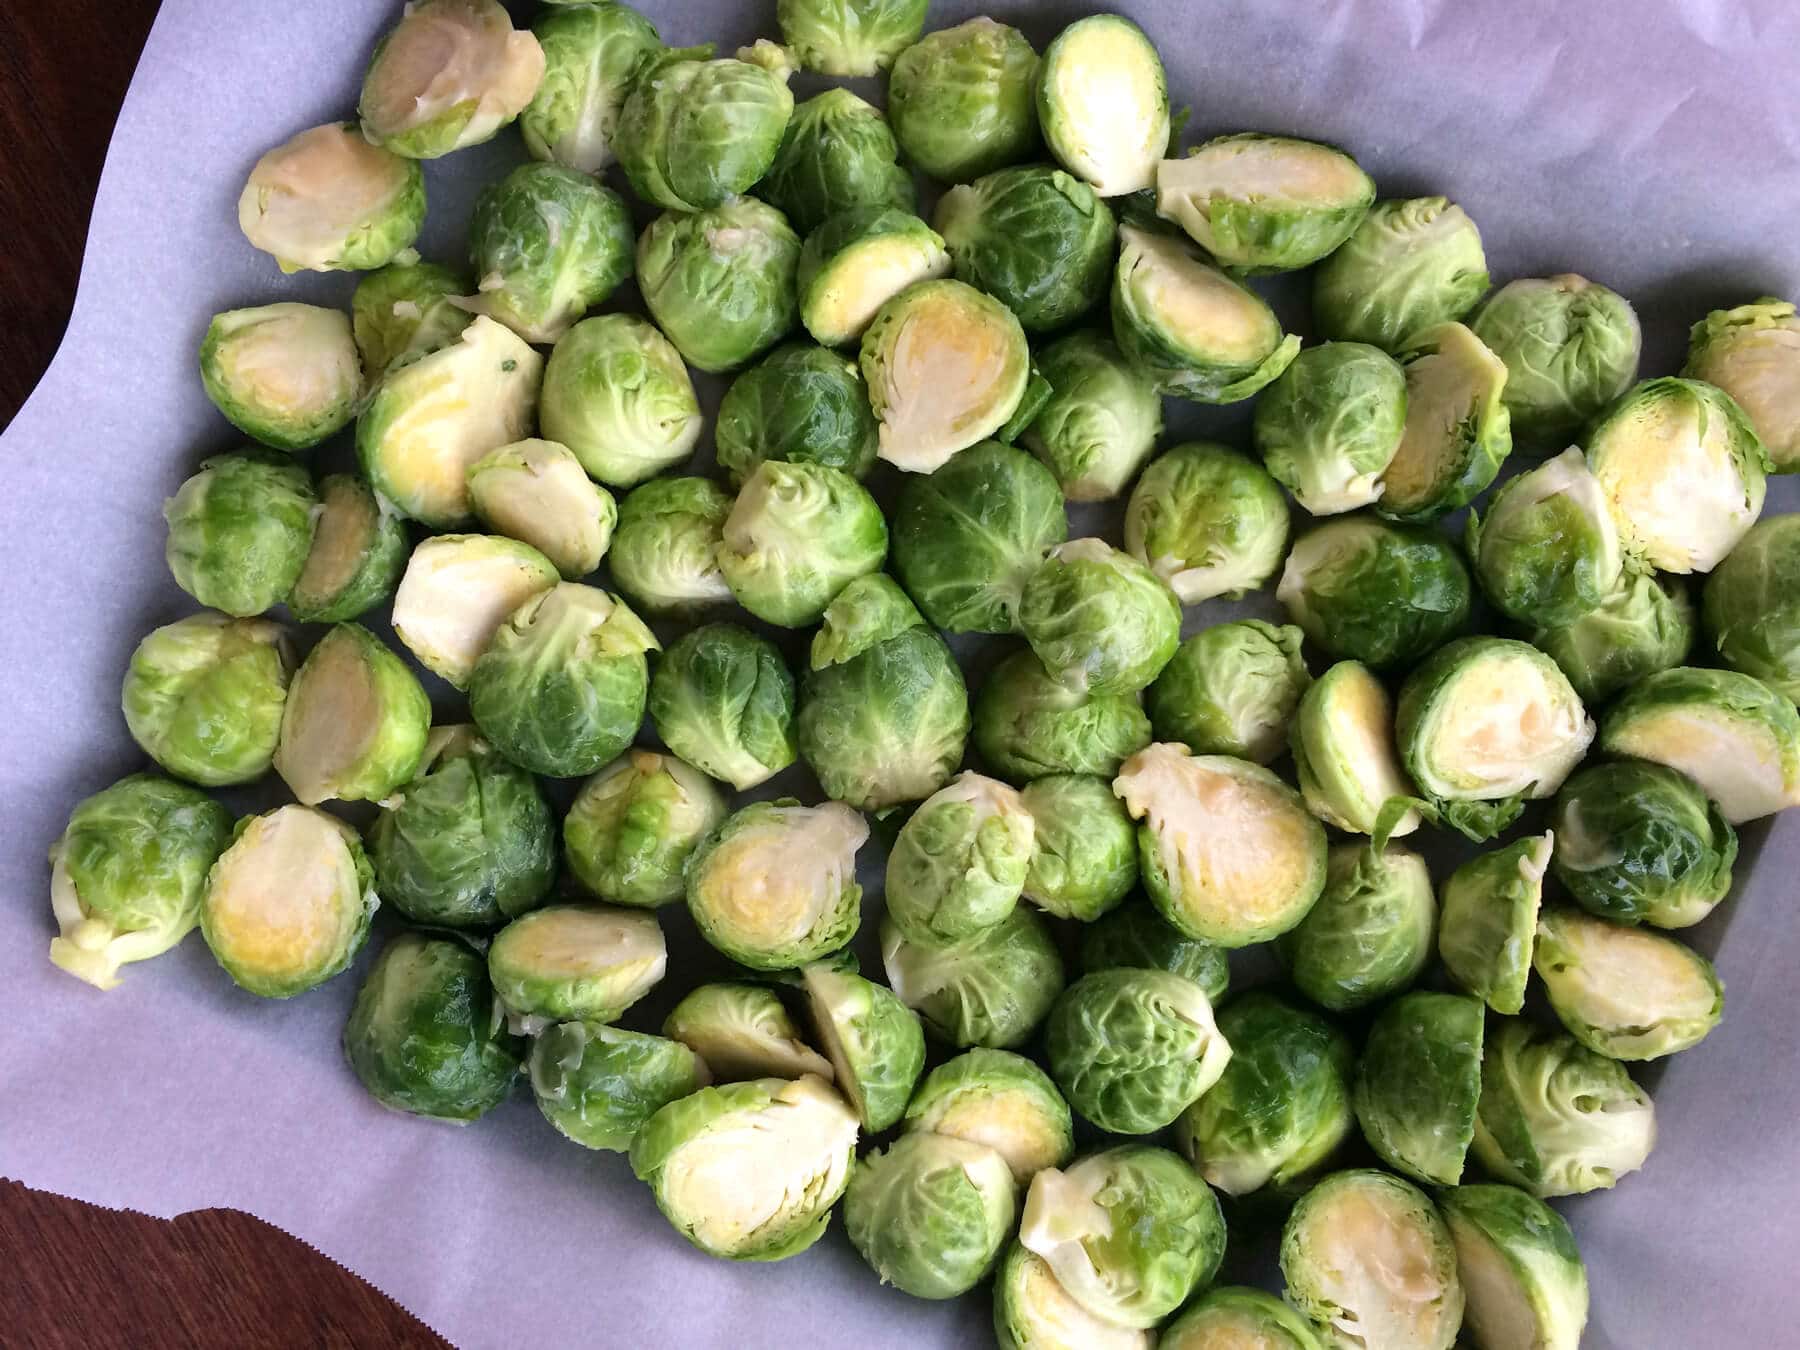 roasted-brussels-sprouts-prep-6